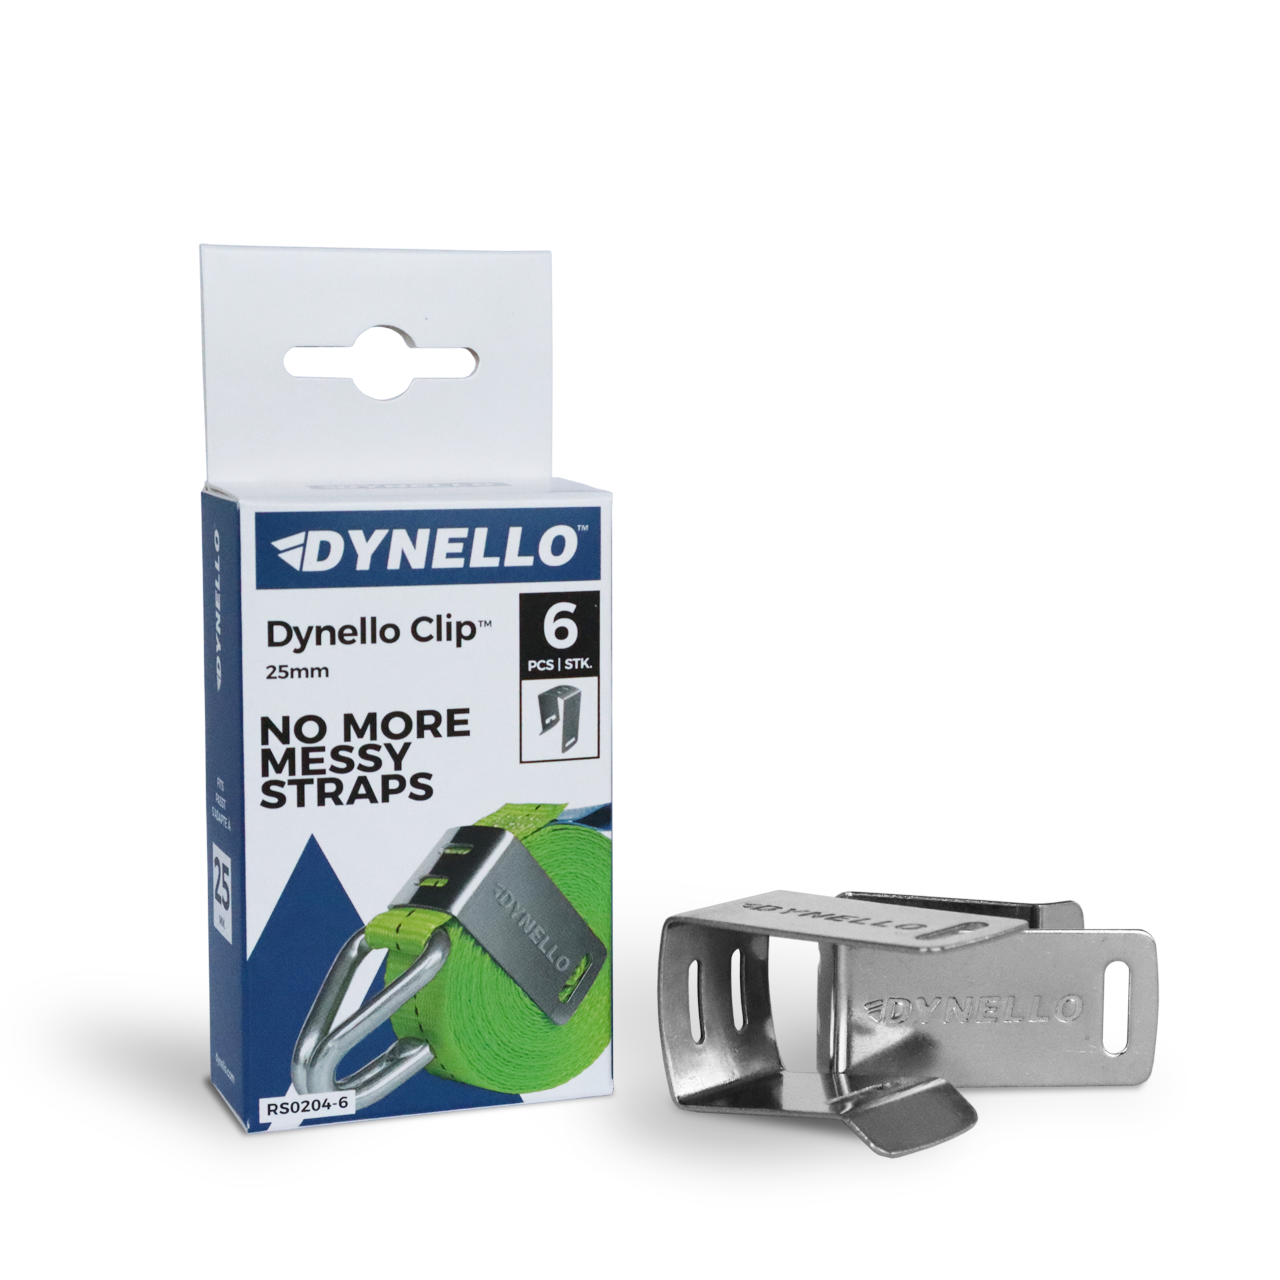 DYNELLO Clip 25mm Steel 6-Pack Strap Clamp